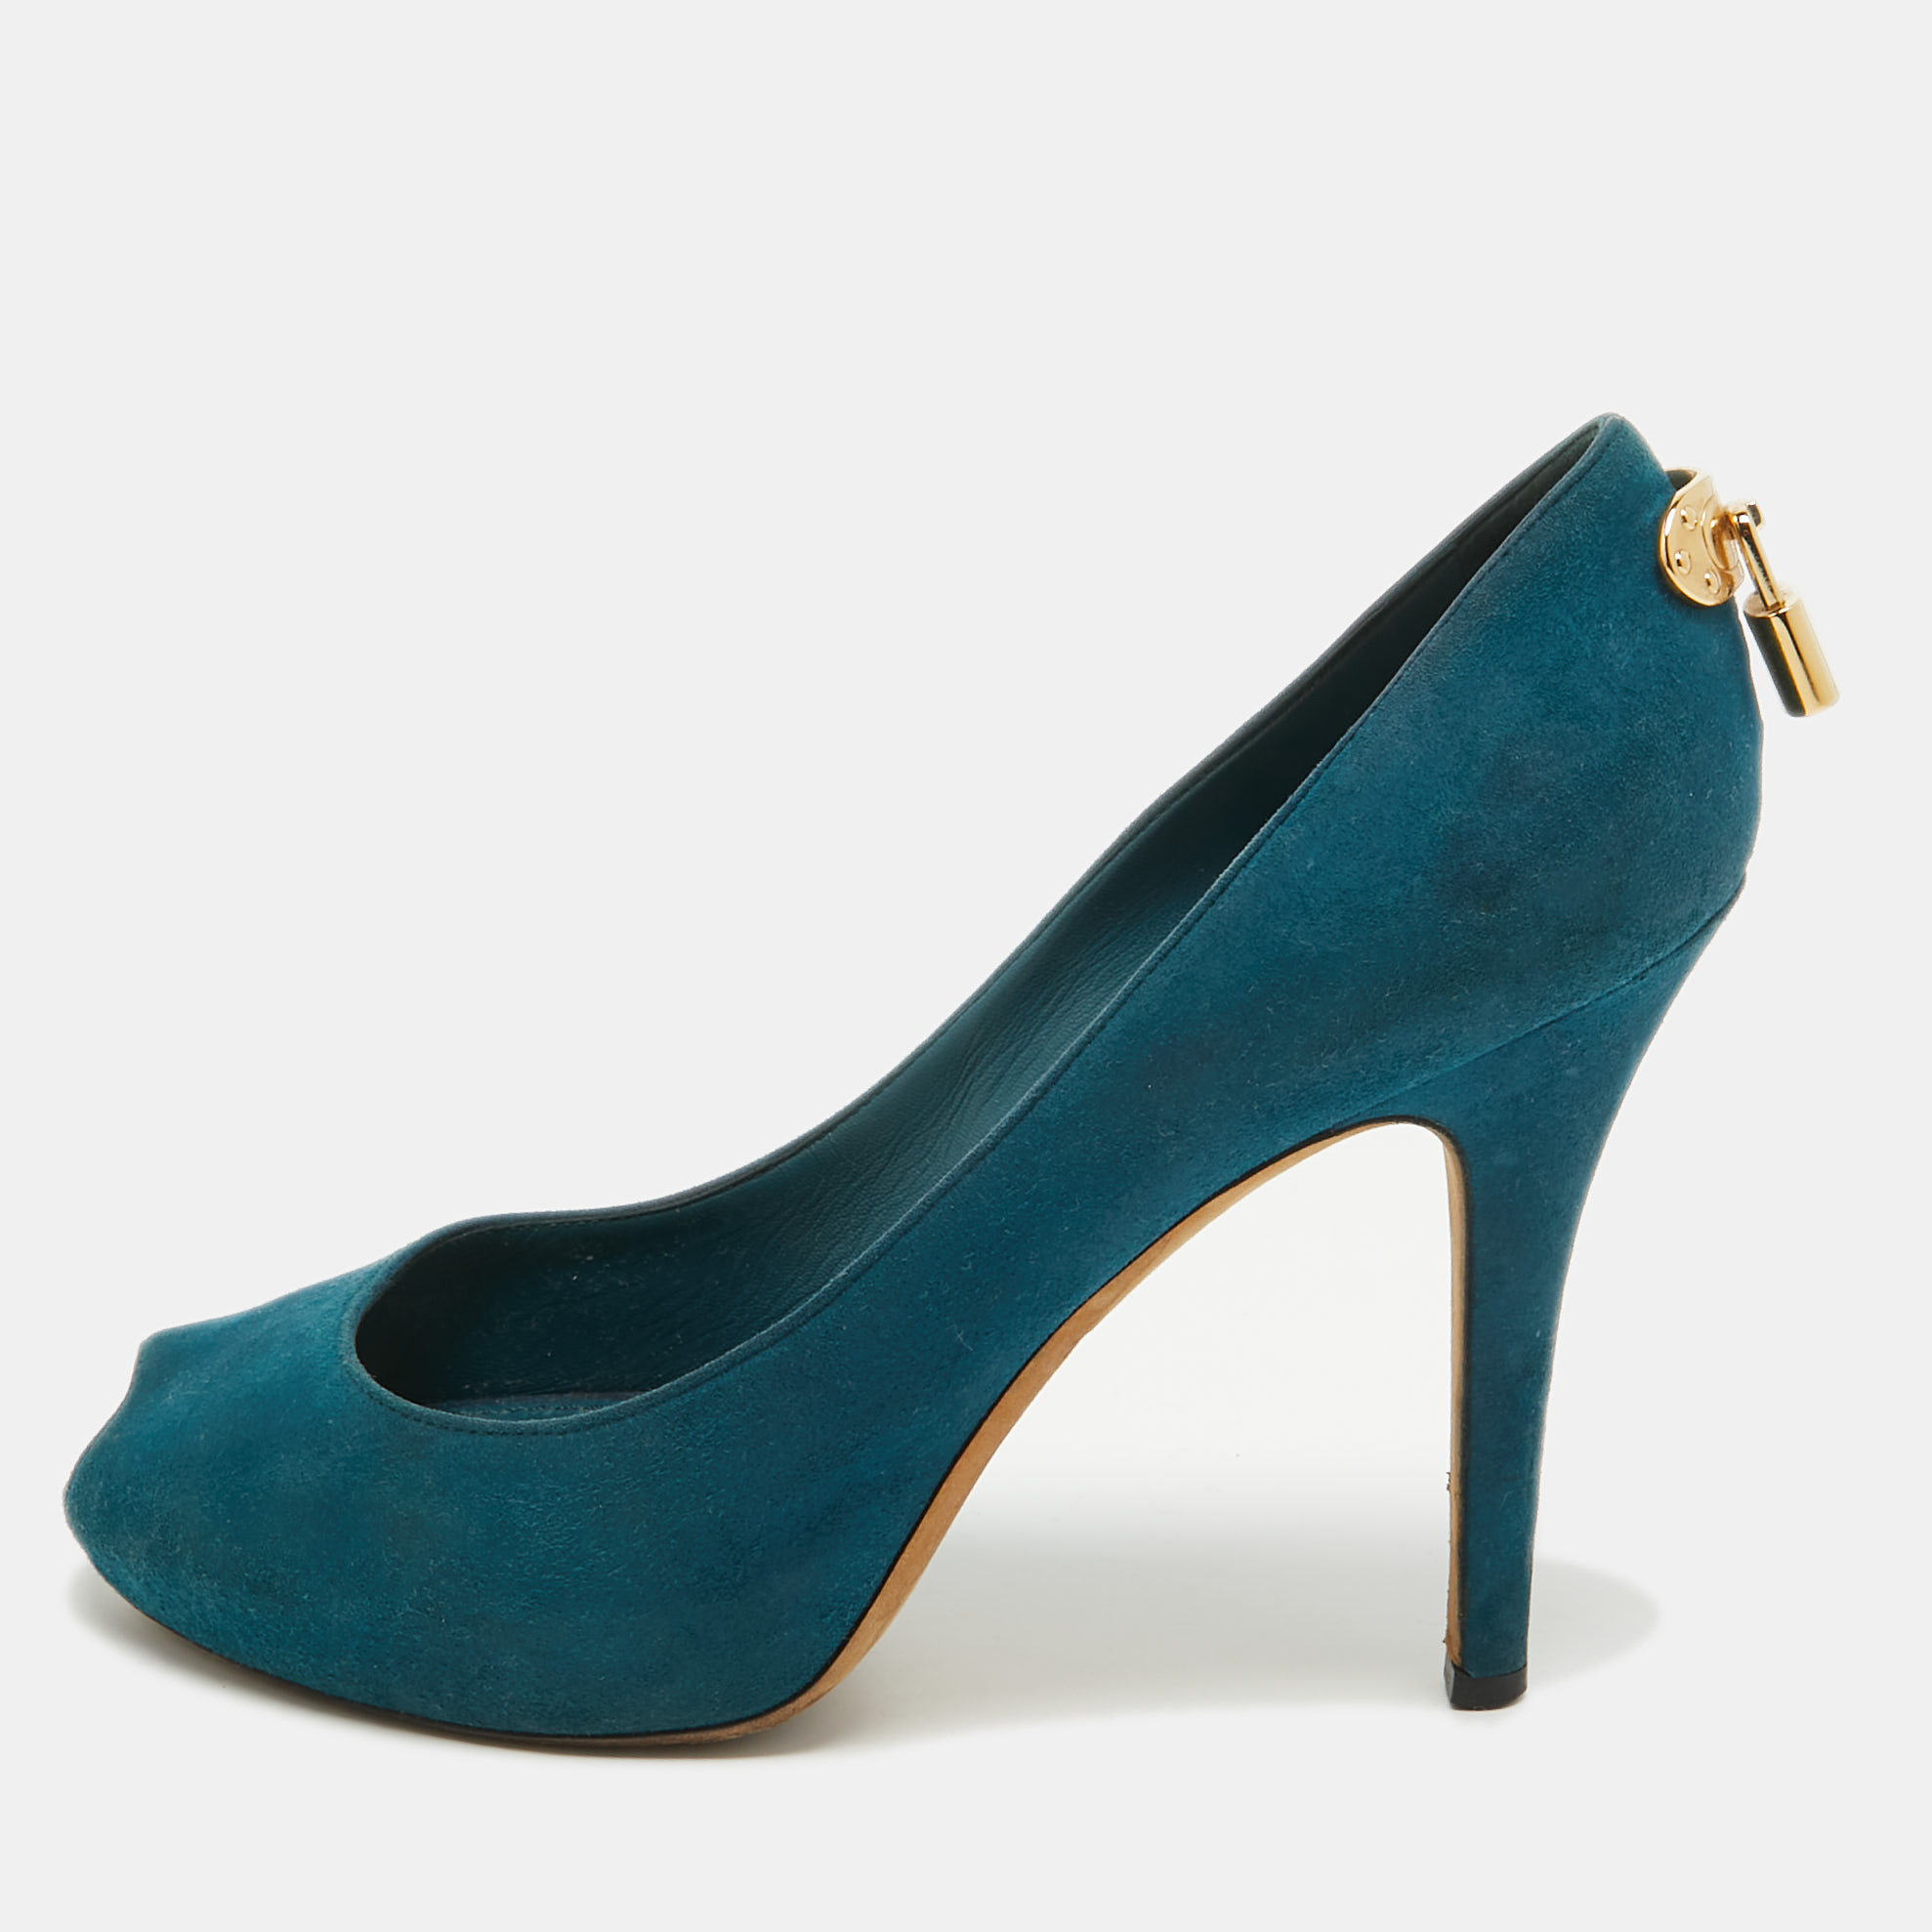 Pre-owned Louis Vuitton Teal Suede Oh Really! Peep Toe Pumps Size 38.5 In Green